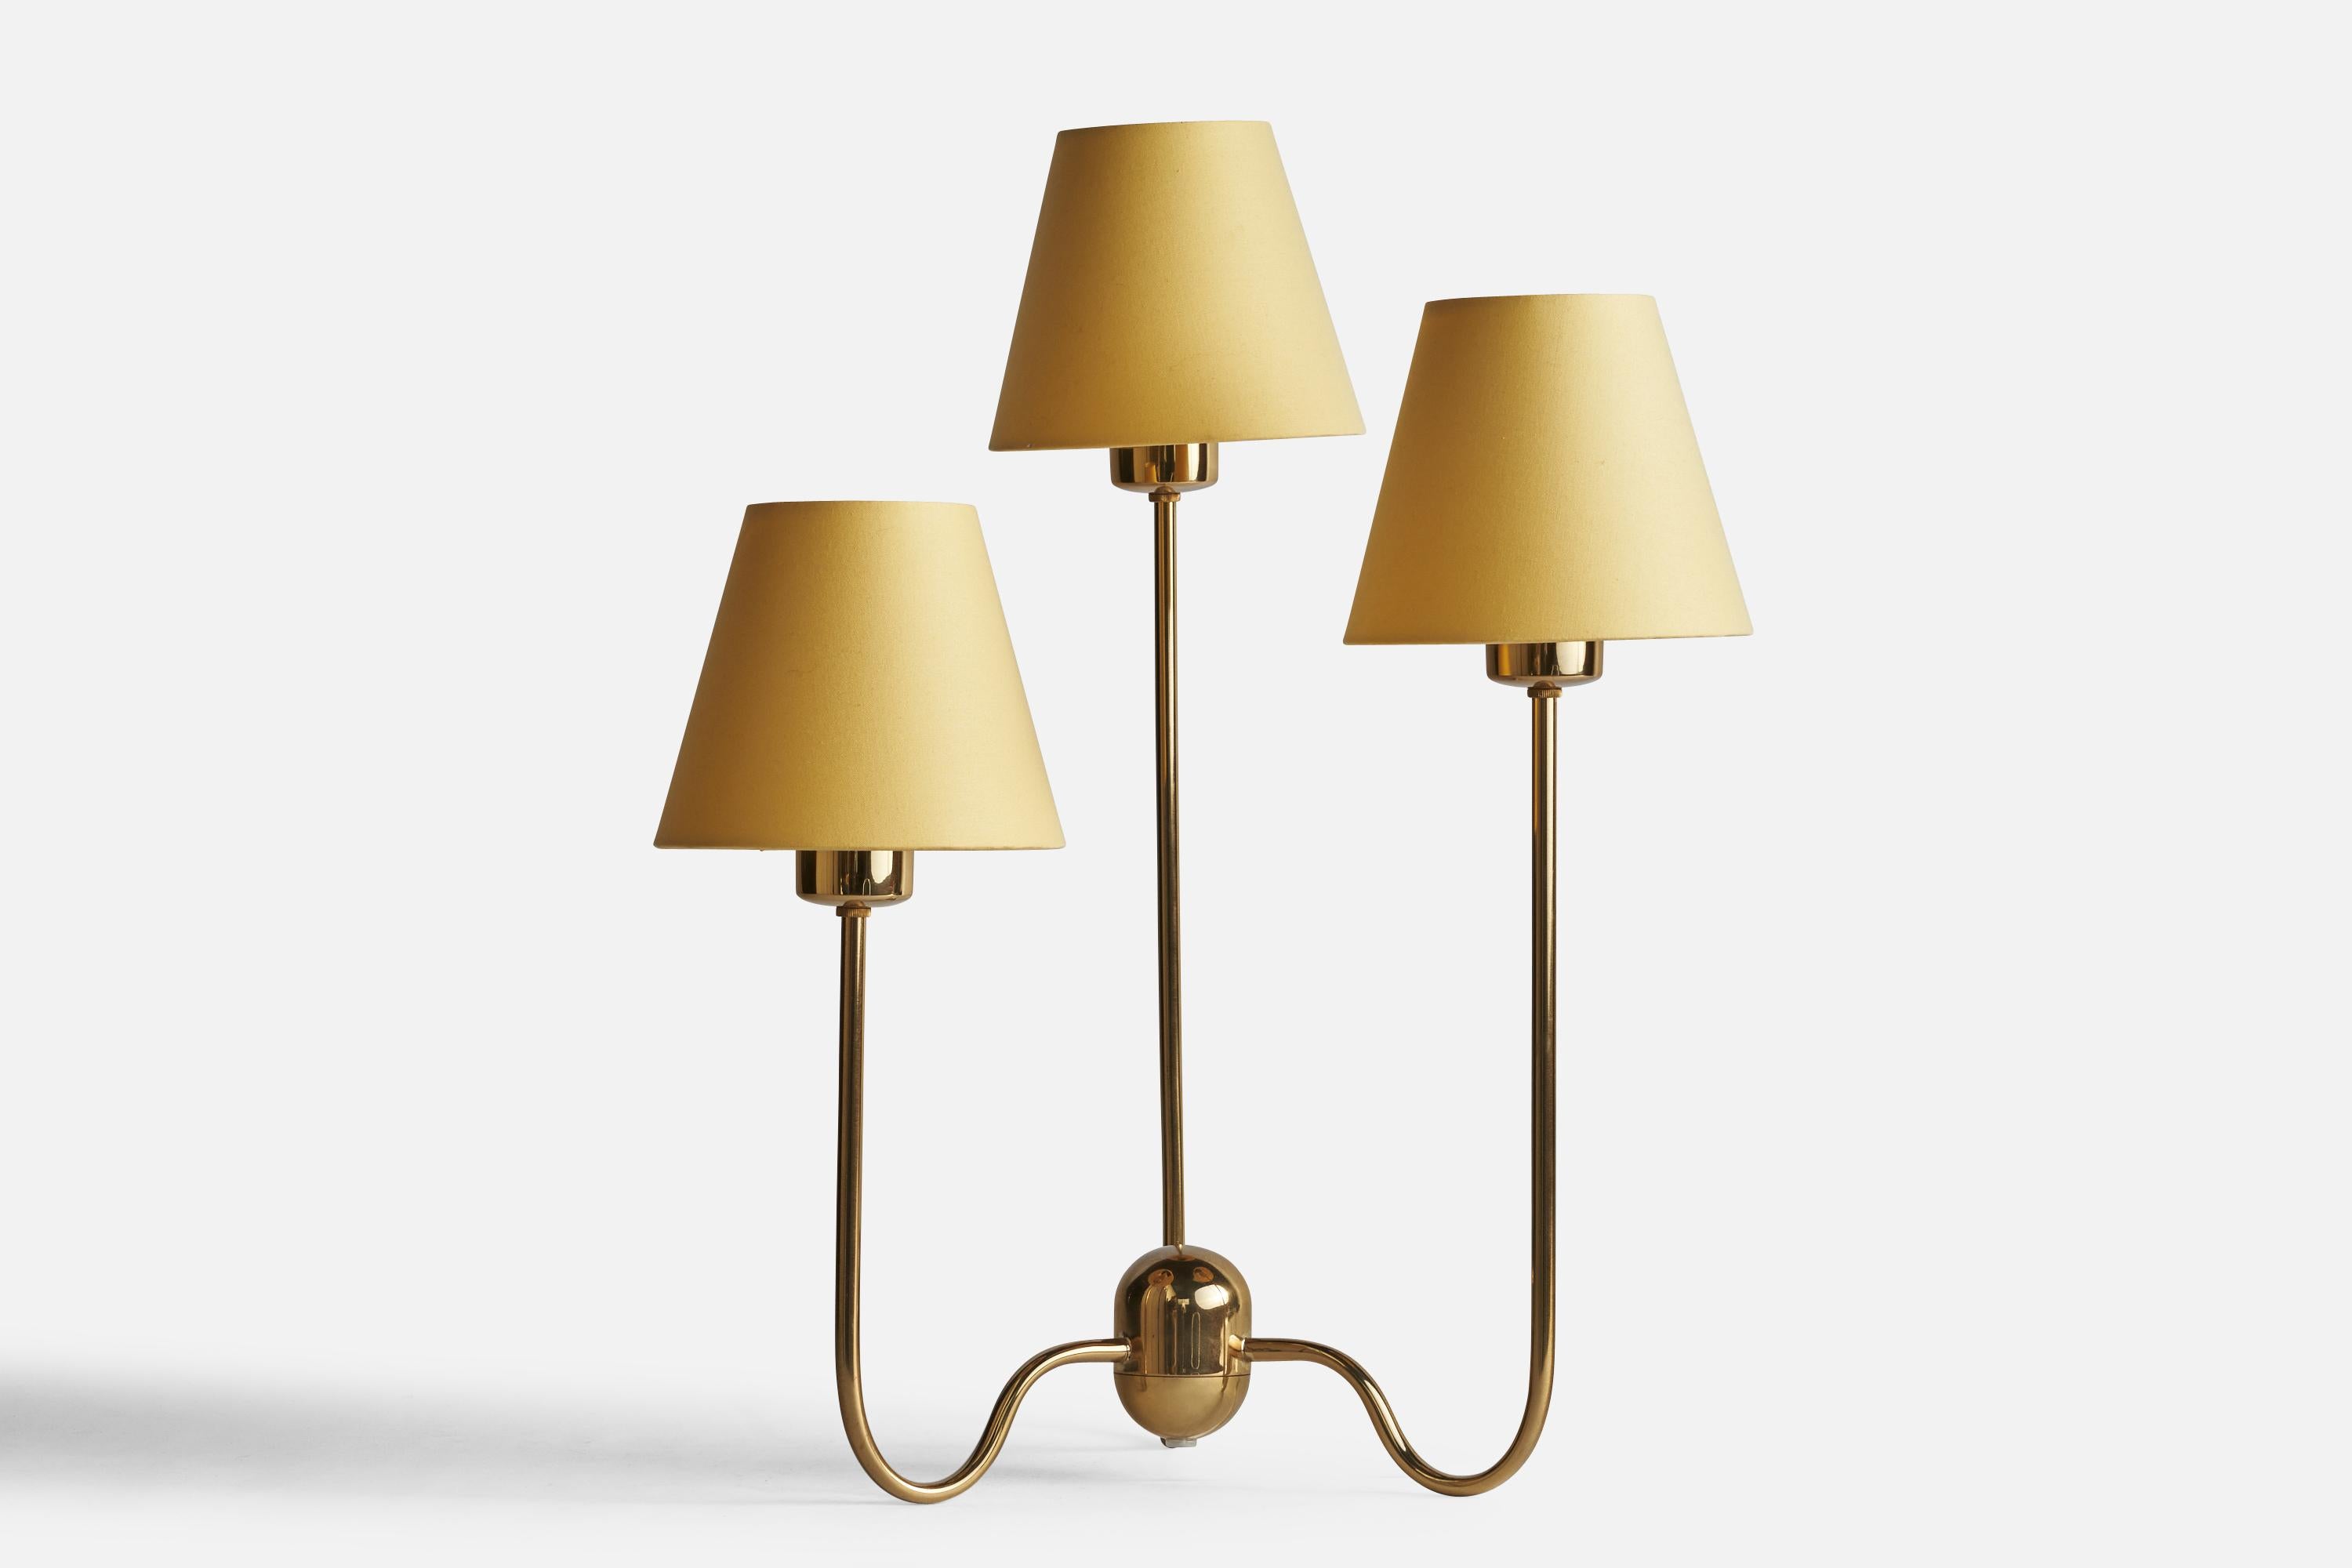 A brass and yellow fabric table lamp designed by Josef Frank, c. 1930s, this example produced by Svenskt Tenn, c. 1990s.

Overall Dimensions (inches): 20.45” H x 15.75” x 14.75” D
Bulb Specifications: E-26 Bulb
Number of Sockets: 3
All lighting will